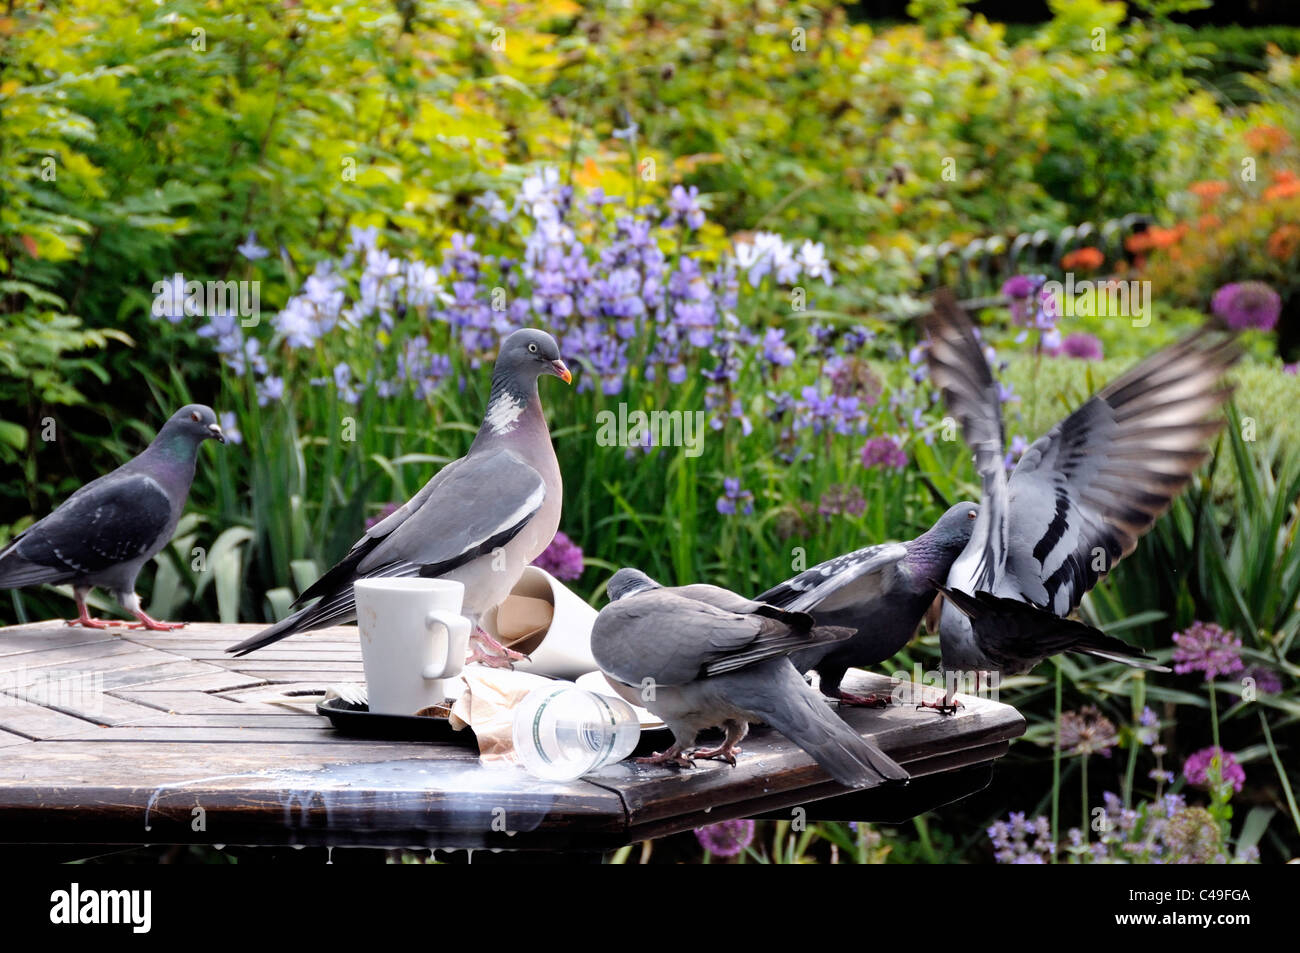 Woodpigeon Columba palumbus eating leftovers on table in park Stock Photo